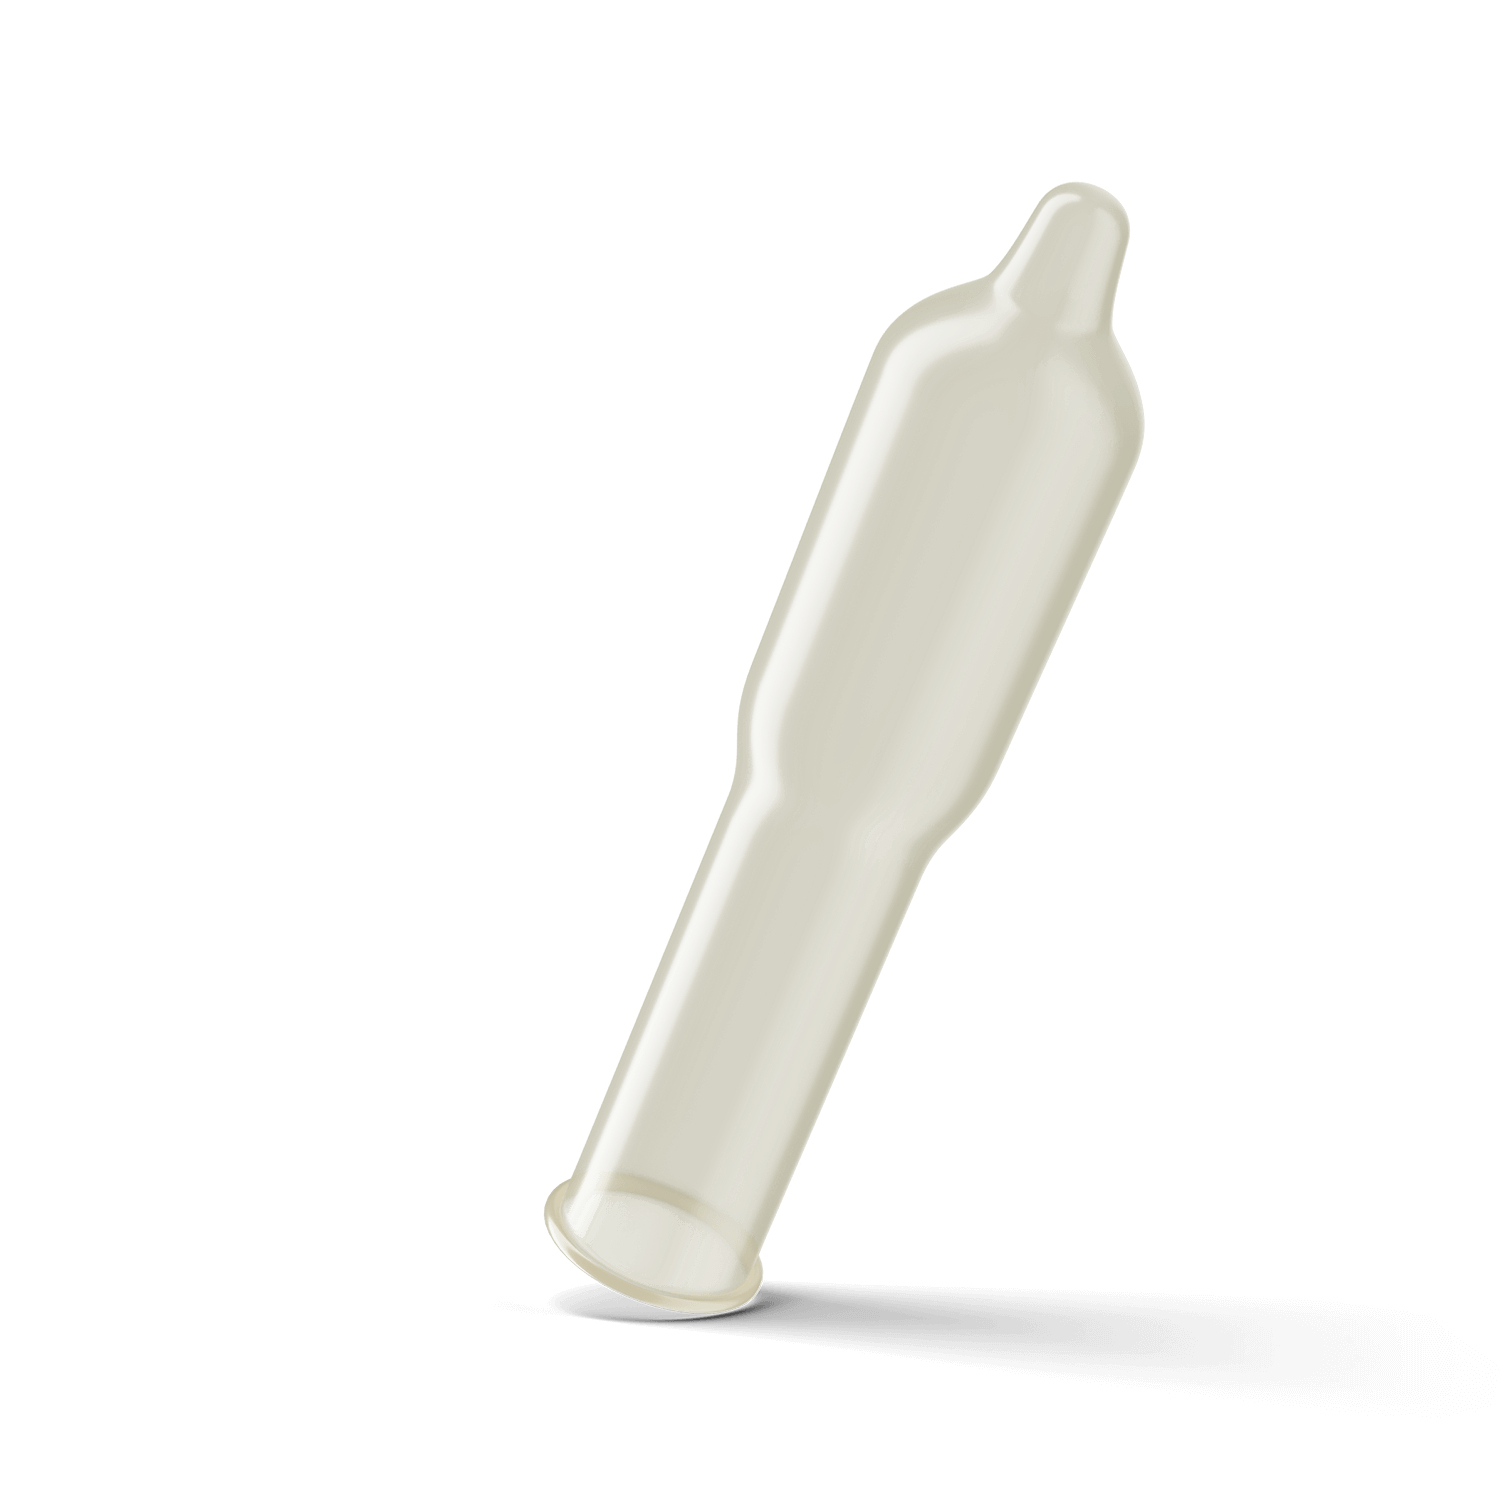 Trojan Fire and Ice bulbous condom with reservoir tip.